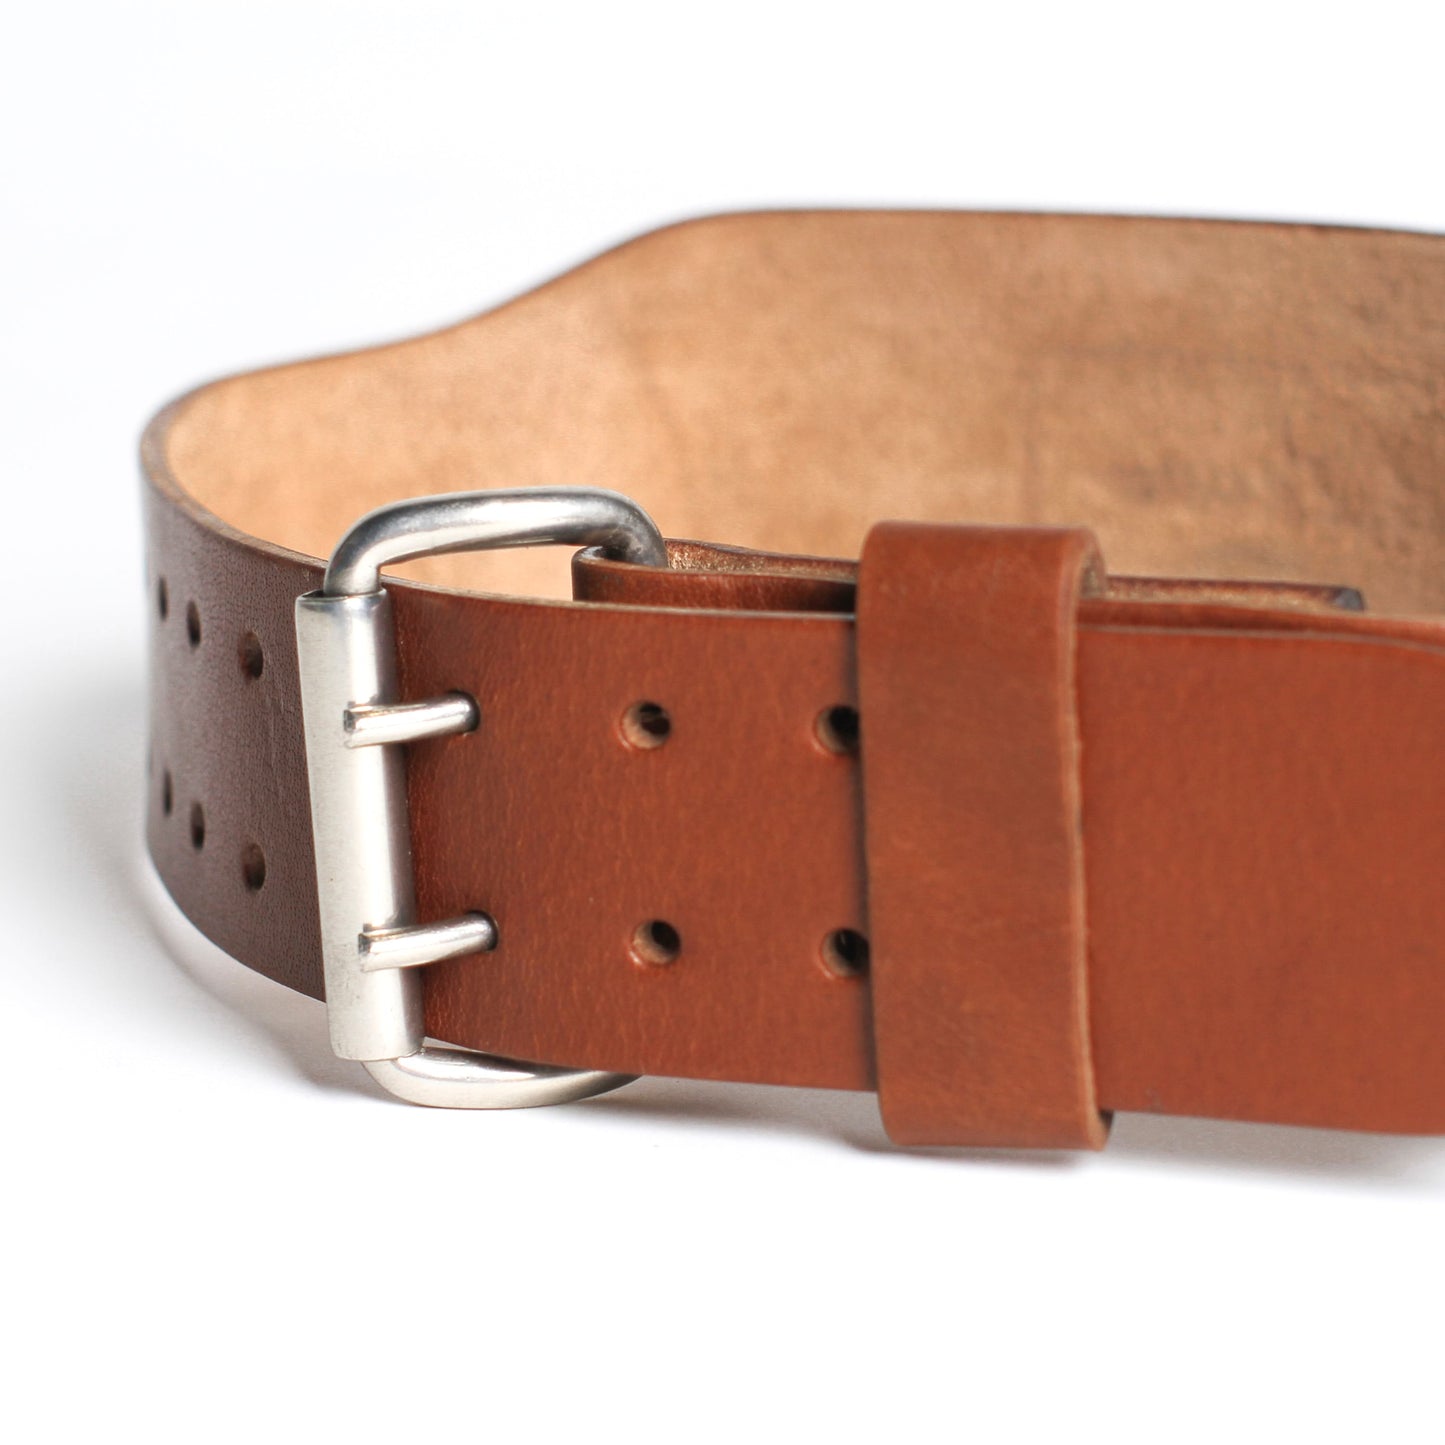 The Original // Leather Lifting Belt // Brown